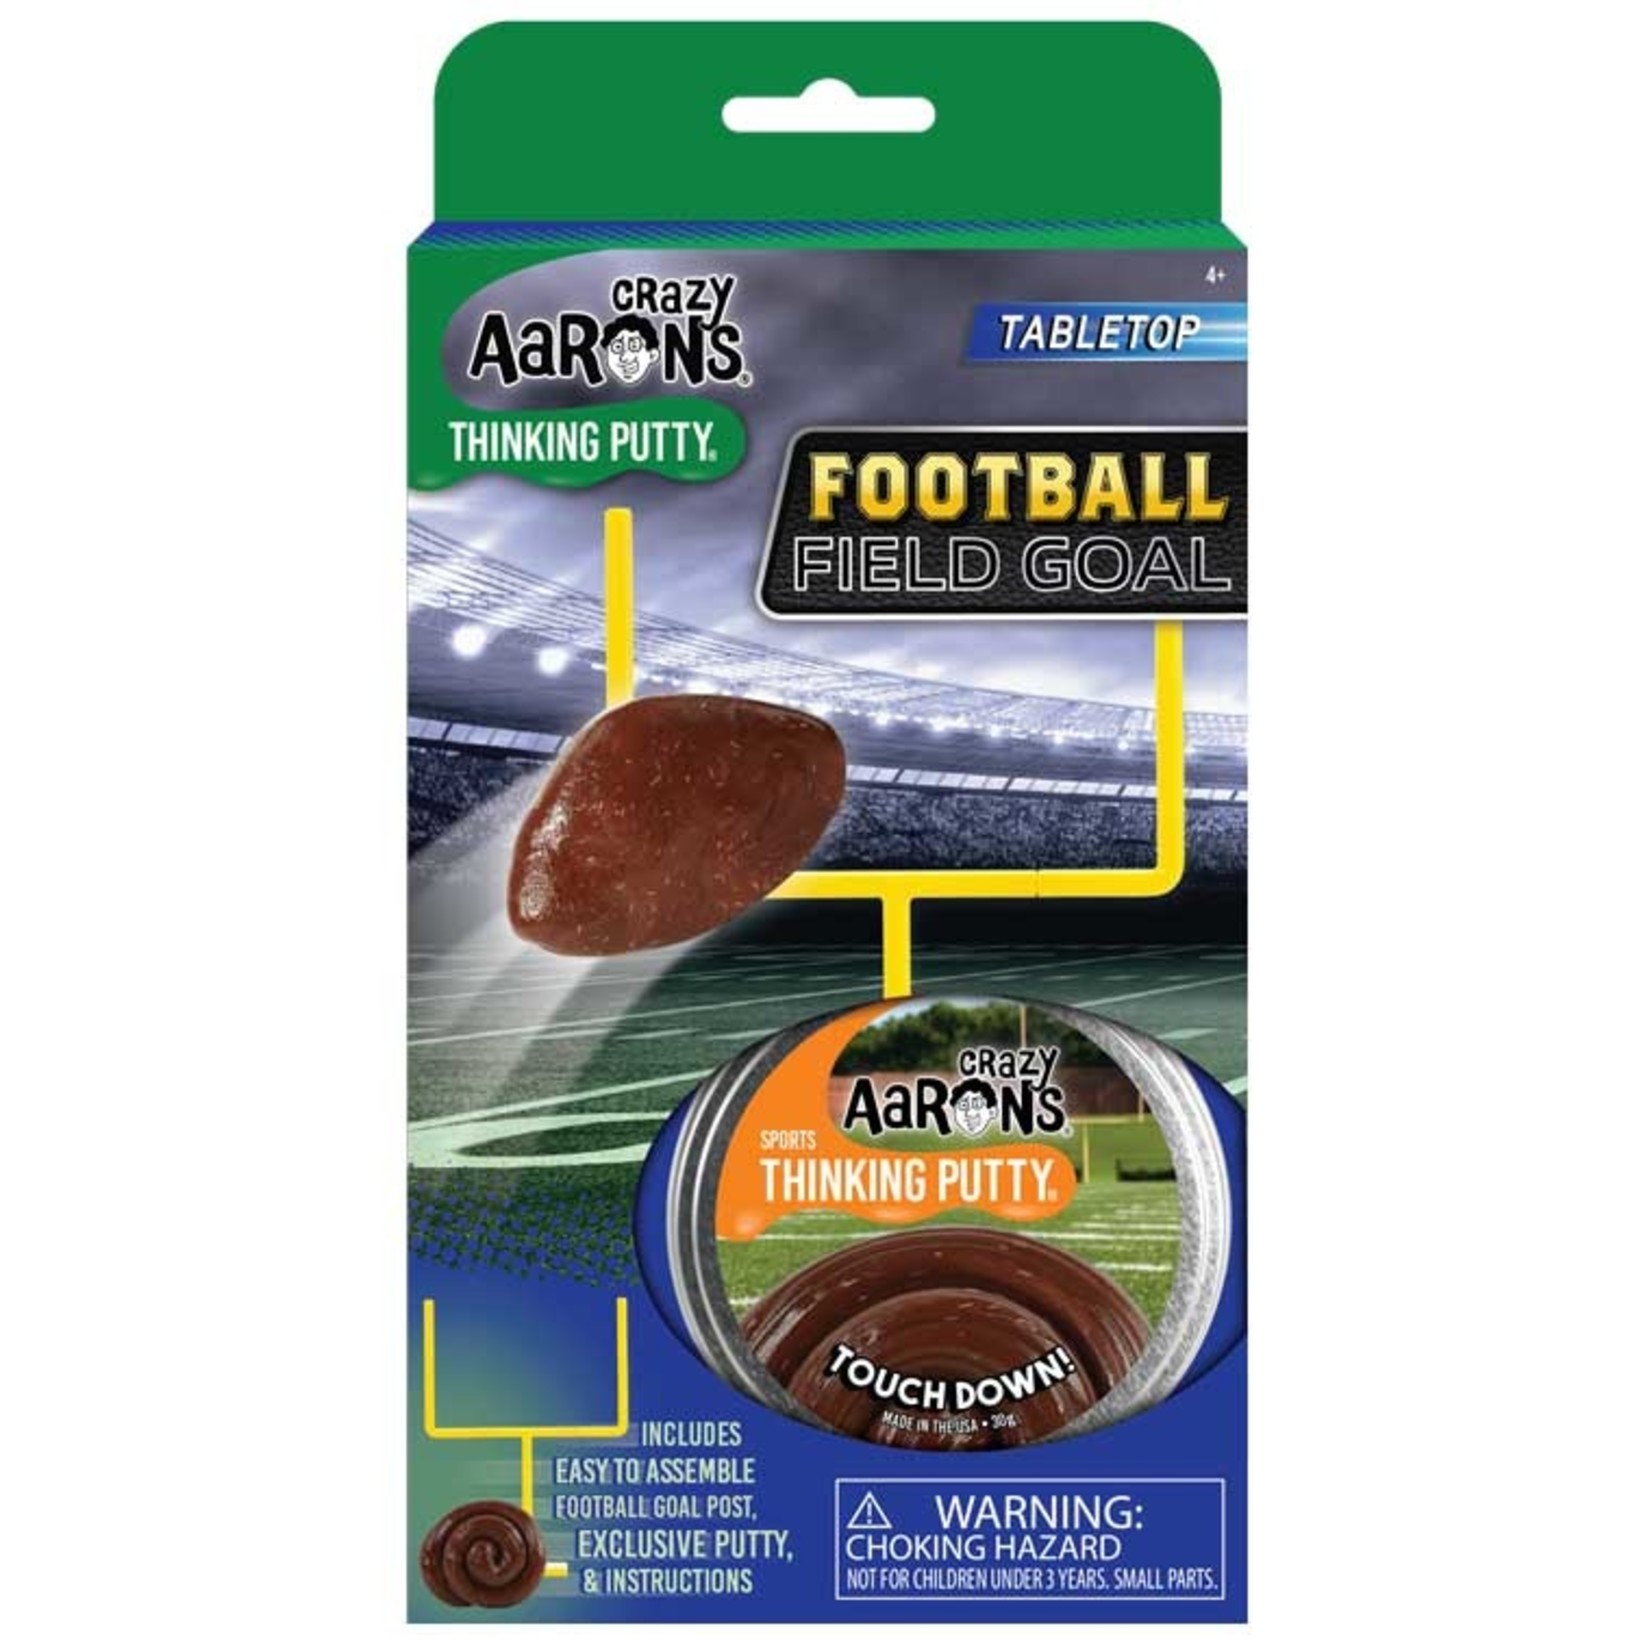 Crazy Aaron's Crazy Aaron's Football Field Goal Touchdown Thinking Putty